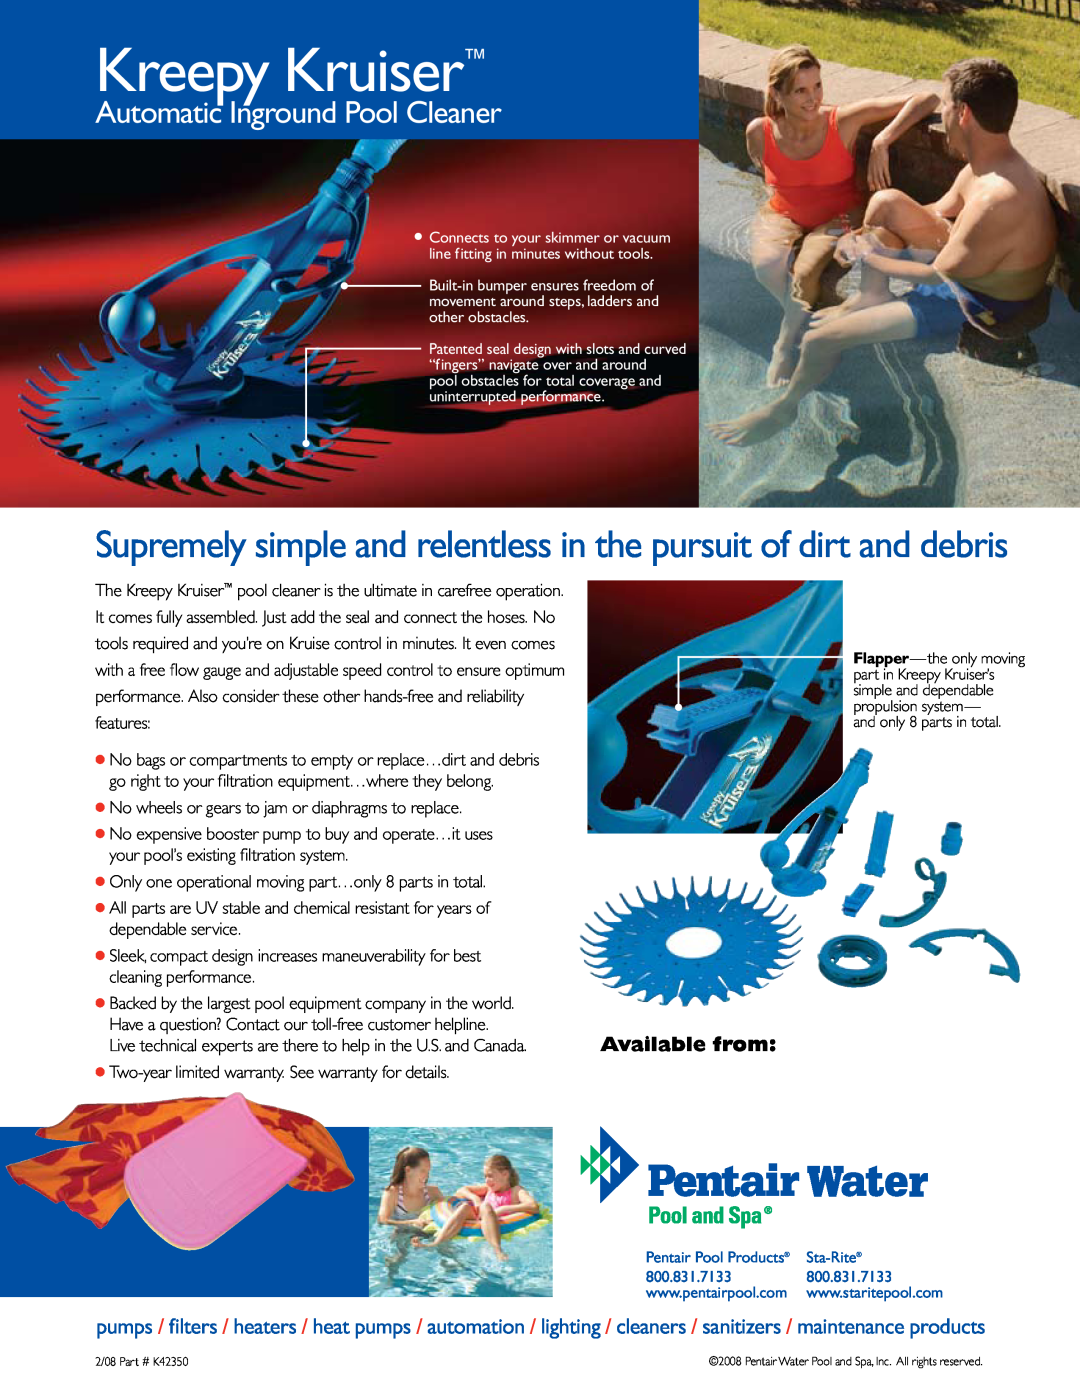 Pentair Kreepy Kruiser Supremely simple and relentless in the pursuit of dirt and debris, Automatic Inground Pool Cleaner 